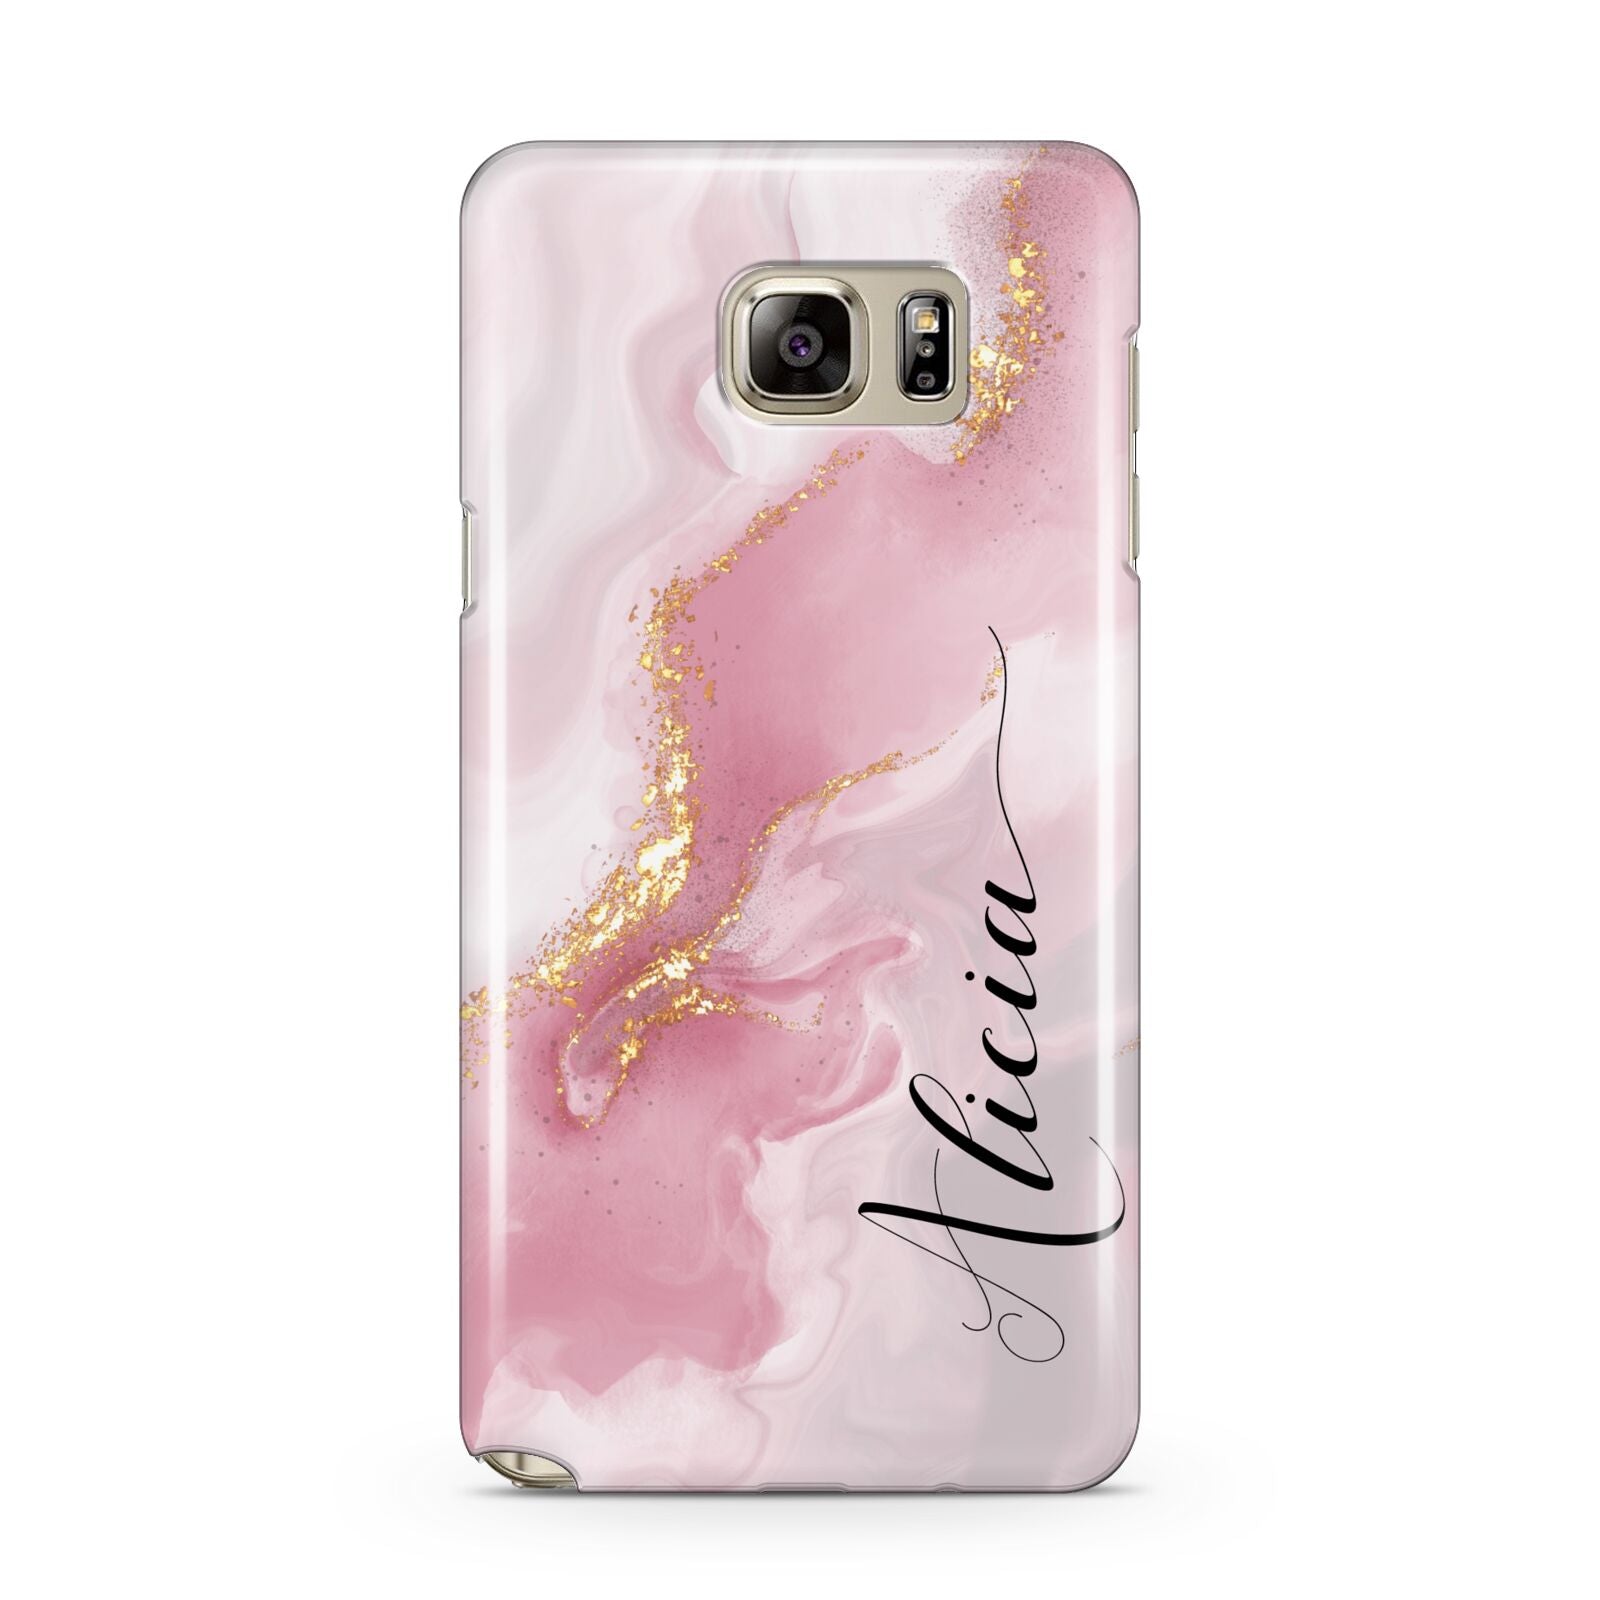 Personalised Pink Marble Samsung Galaxy Note 5 Case